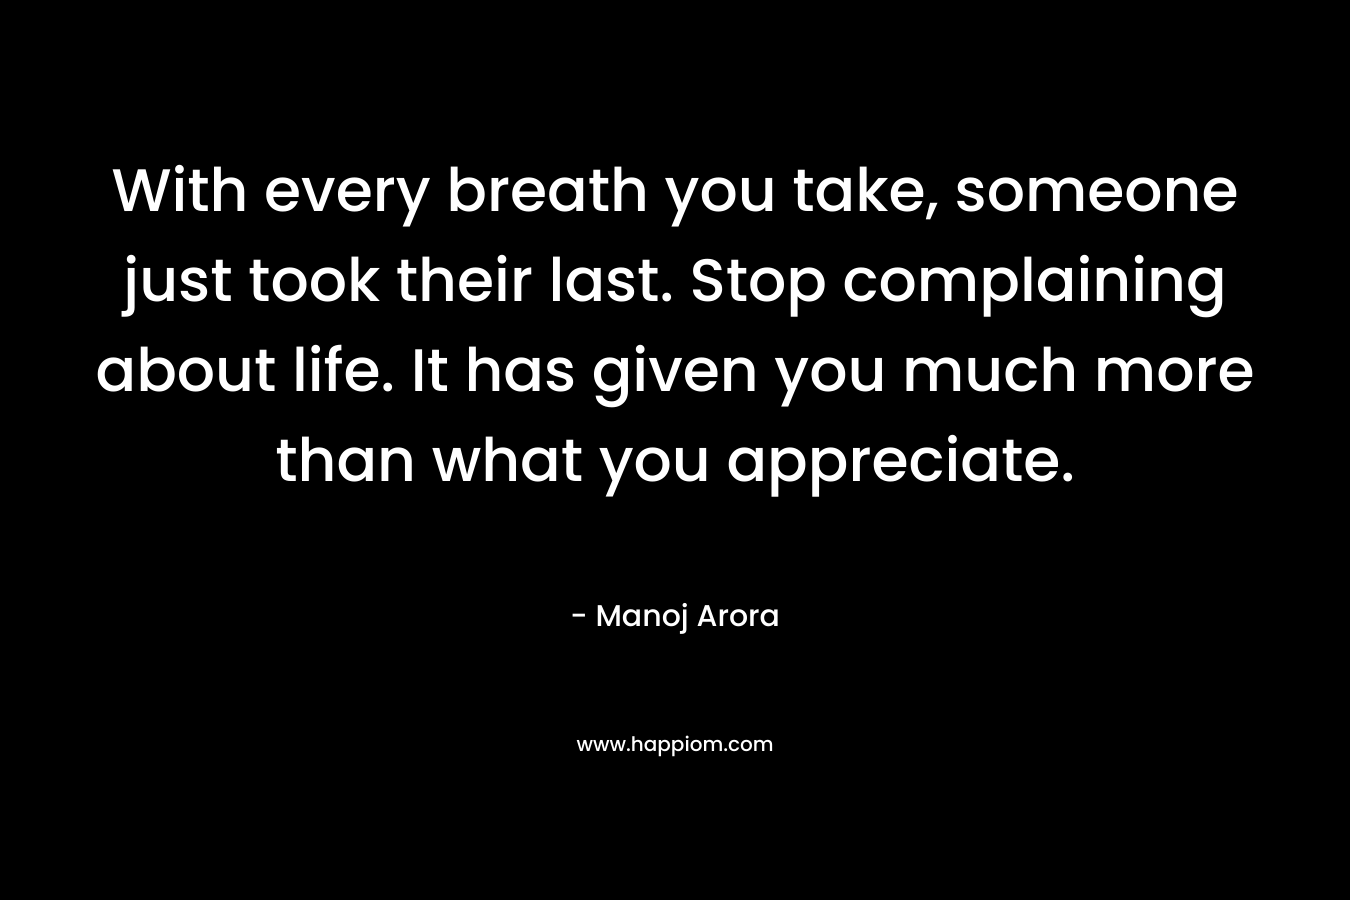 With every breath you take, someone just took their last. Stop complaining about life. It has given you much more than what you appreciate.